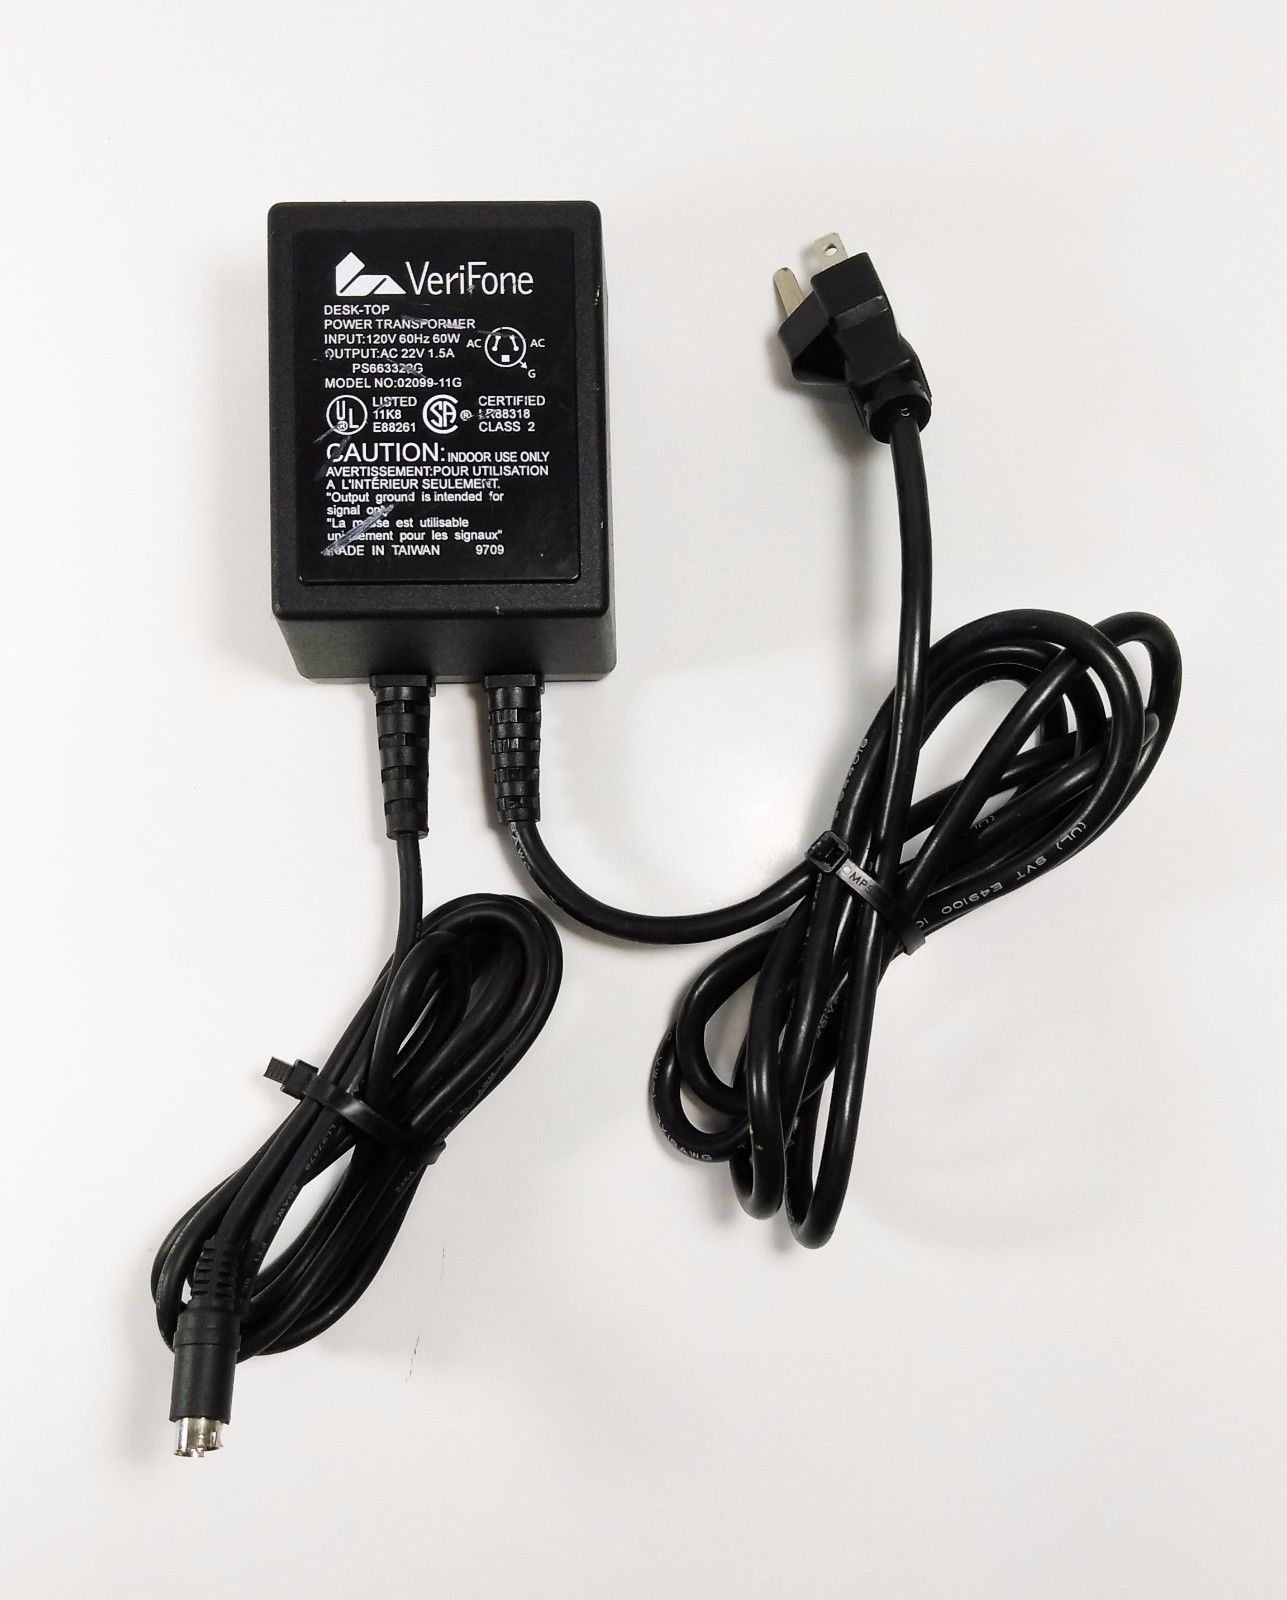 NEW 22V 1.5A VeriFone 02099-11G AC Adapter